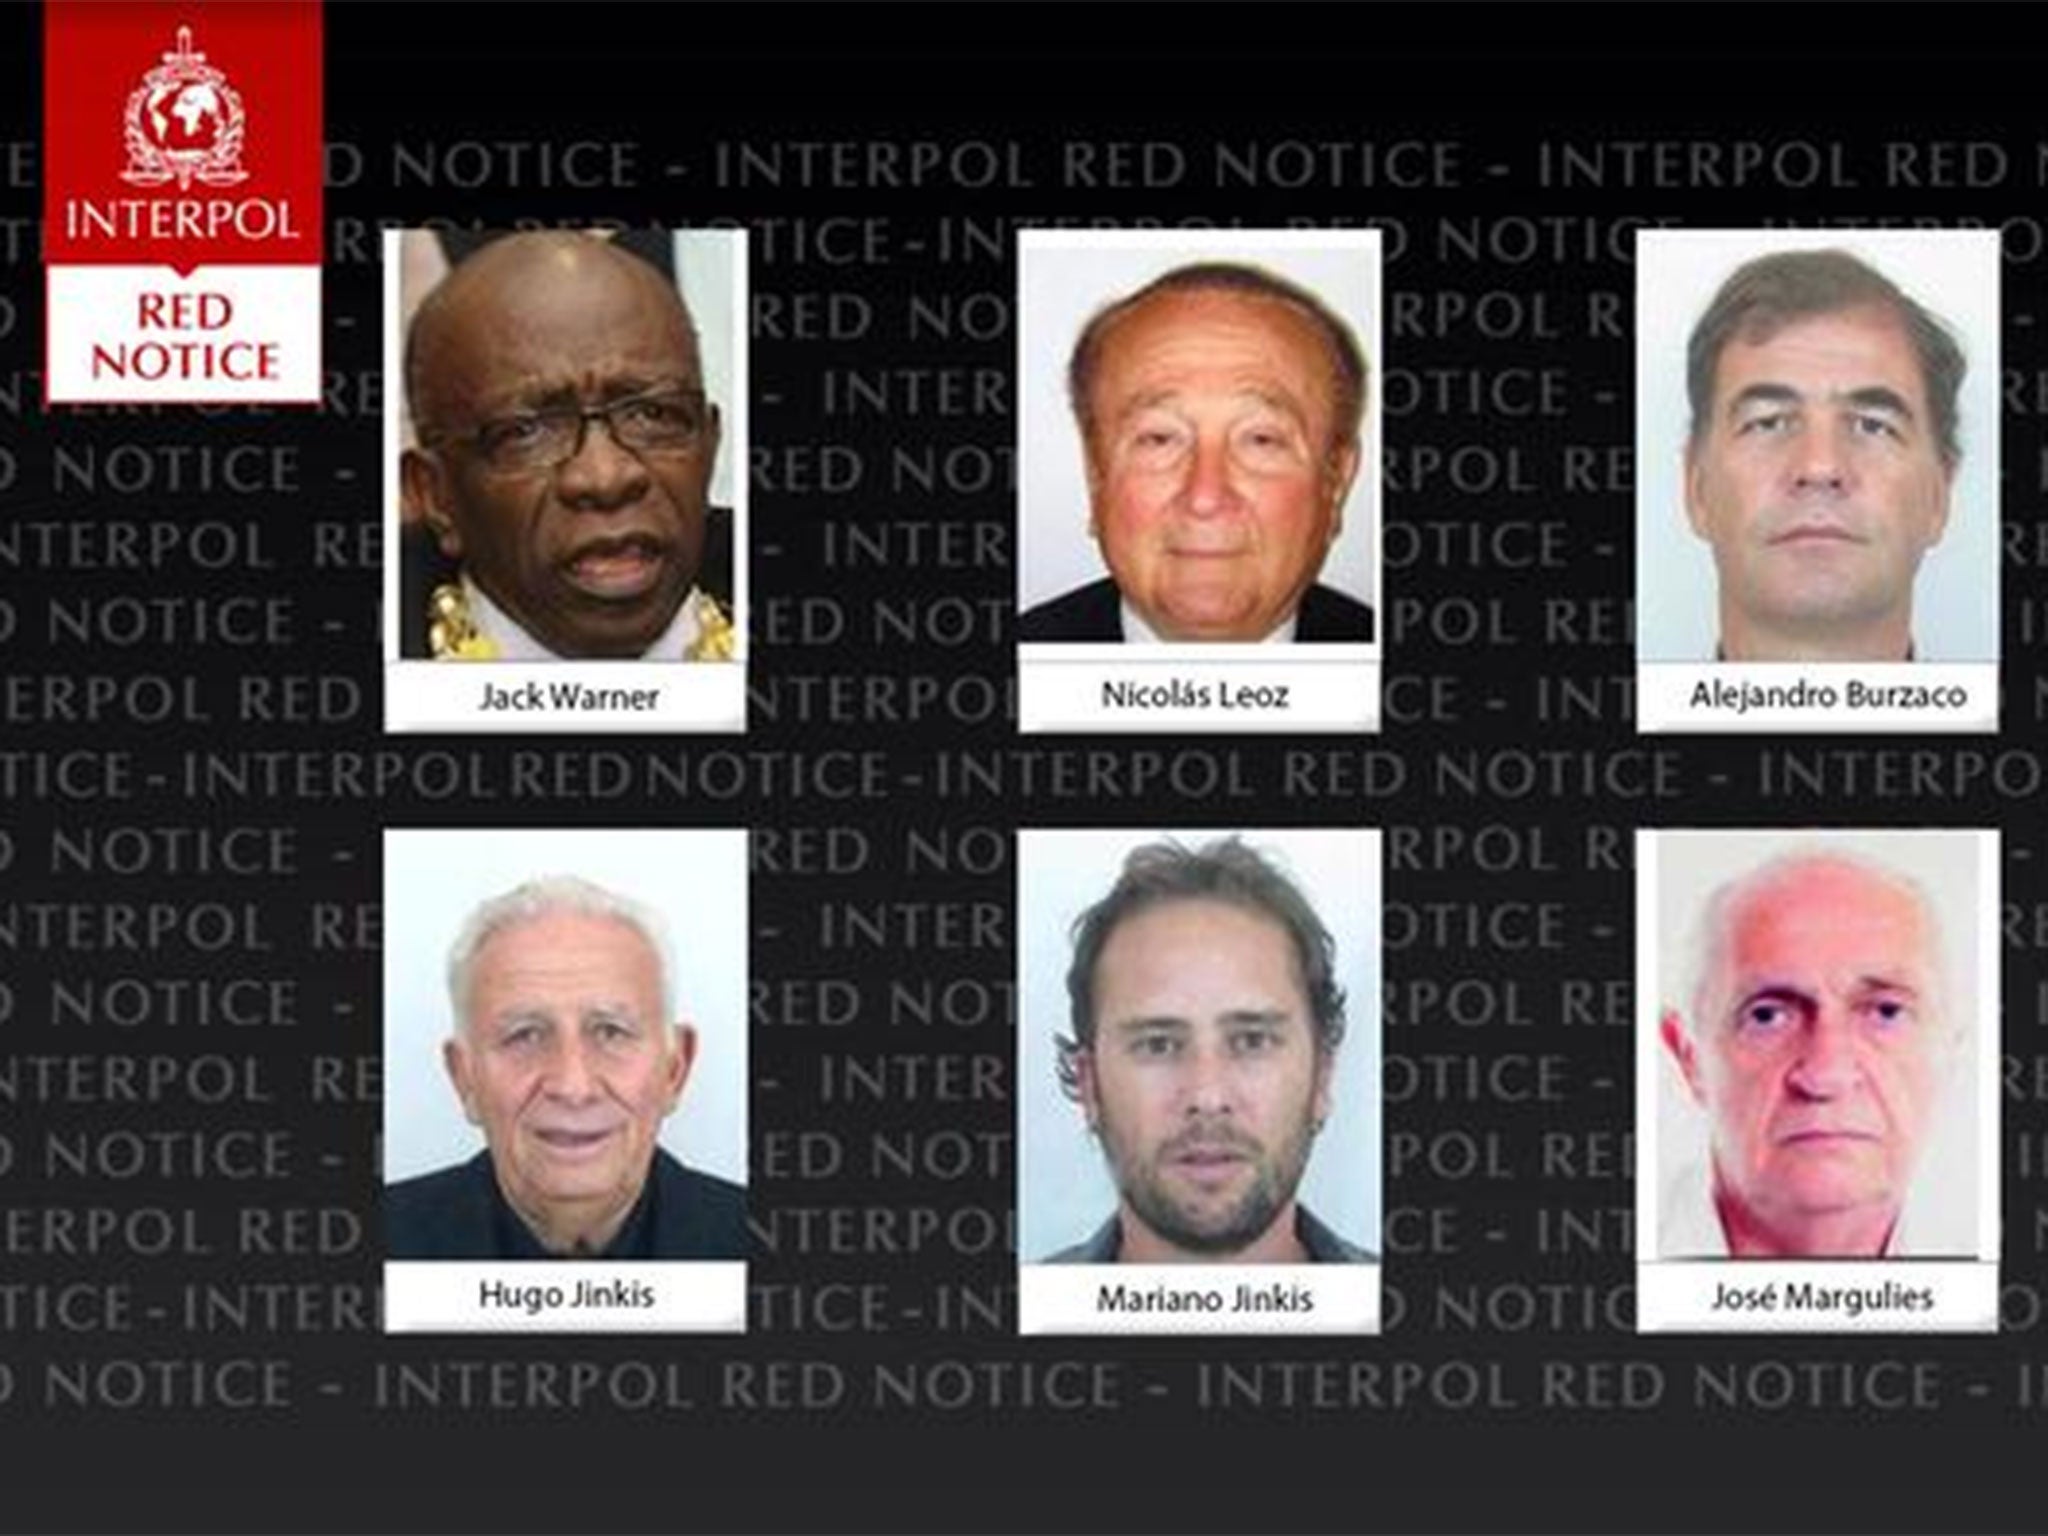 Interpol issued mugshots of the wanted officials